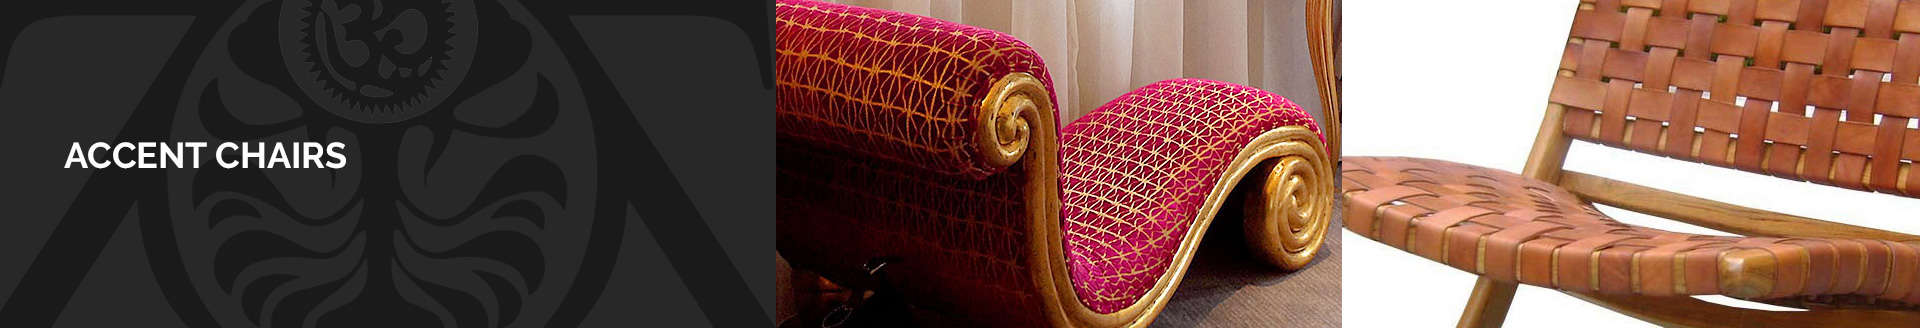 accent chairs catalogue manufacturers indonesia exporters wholesalers suppliers bali java jepara zenddu